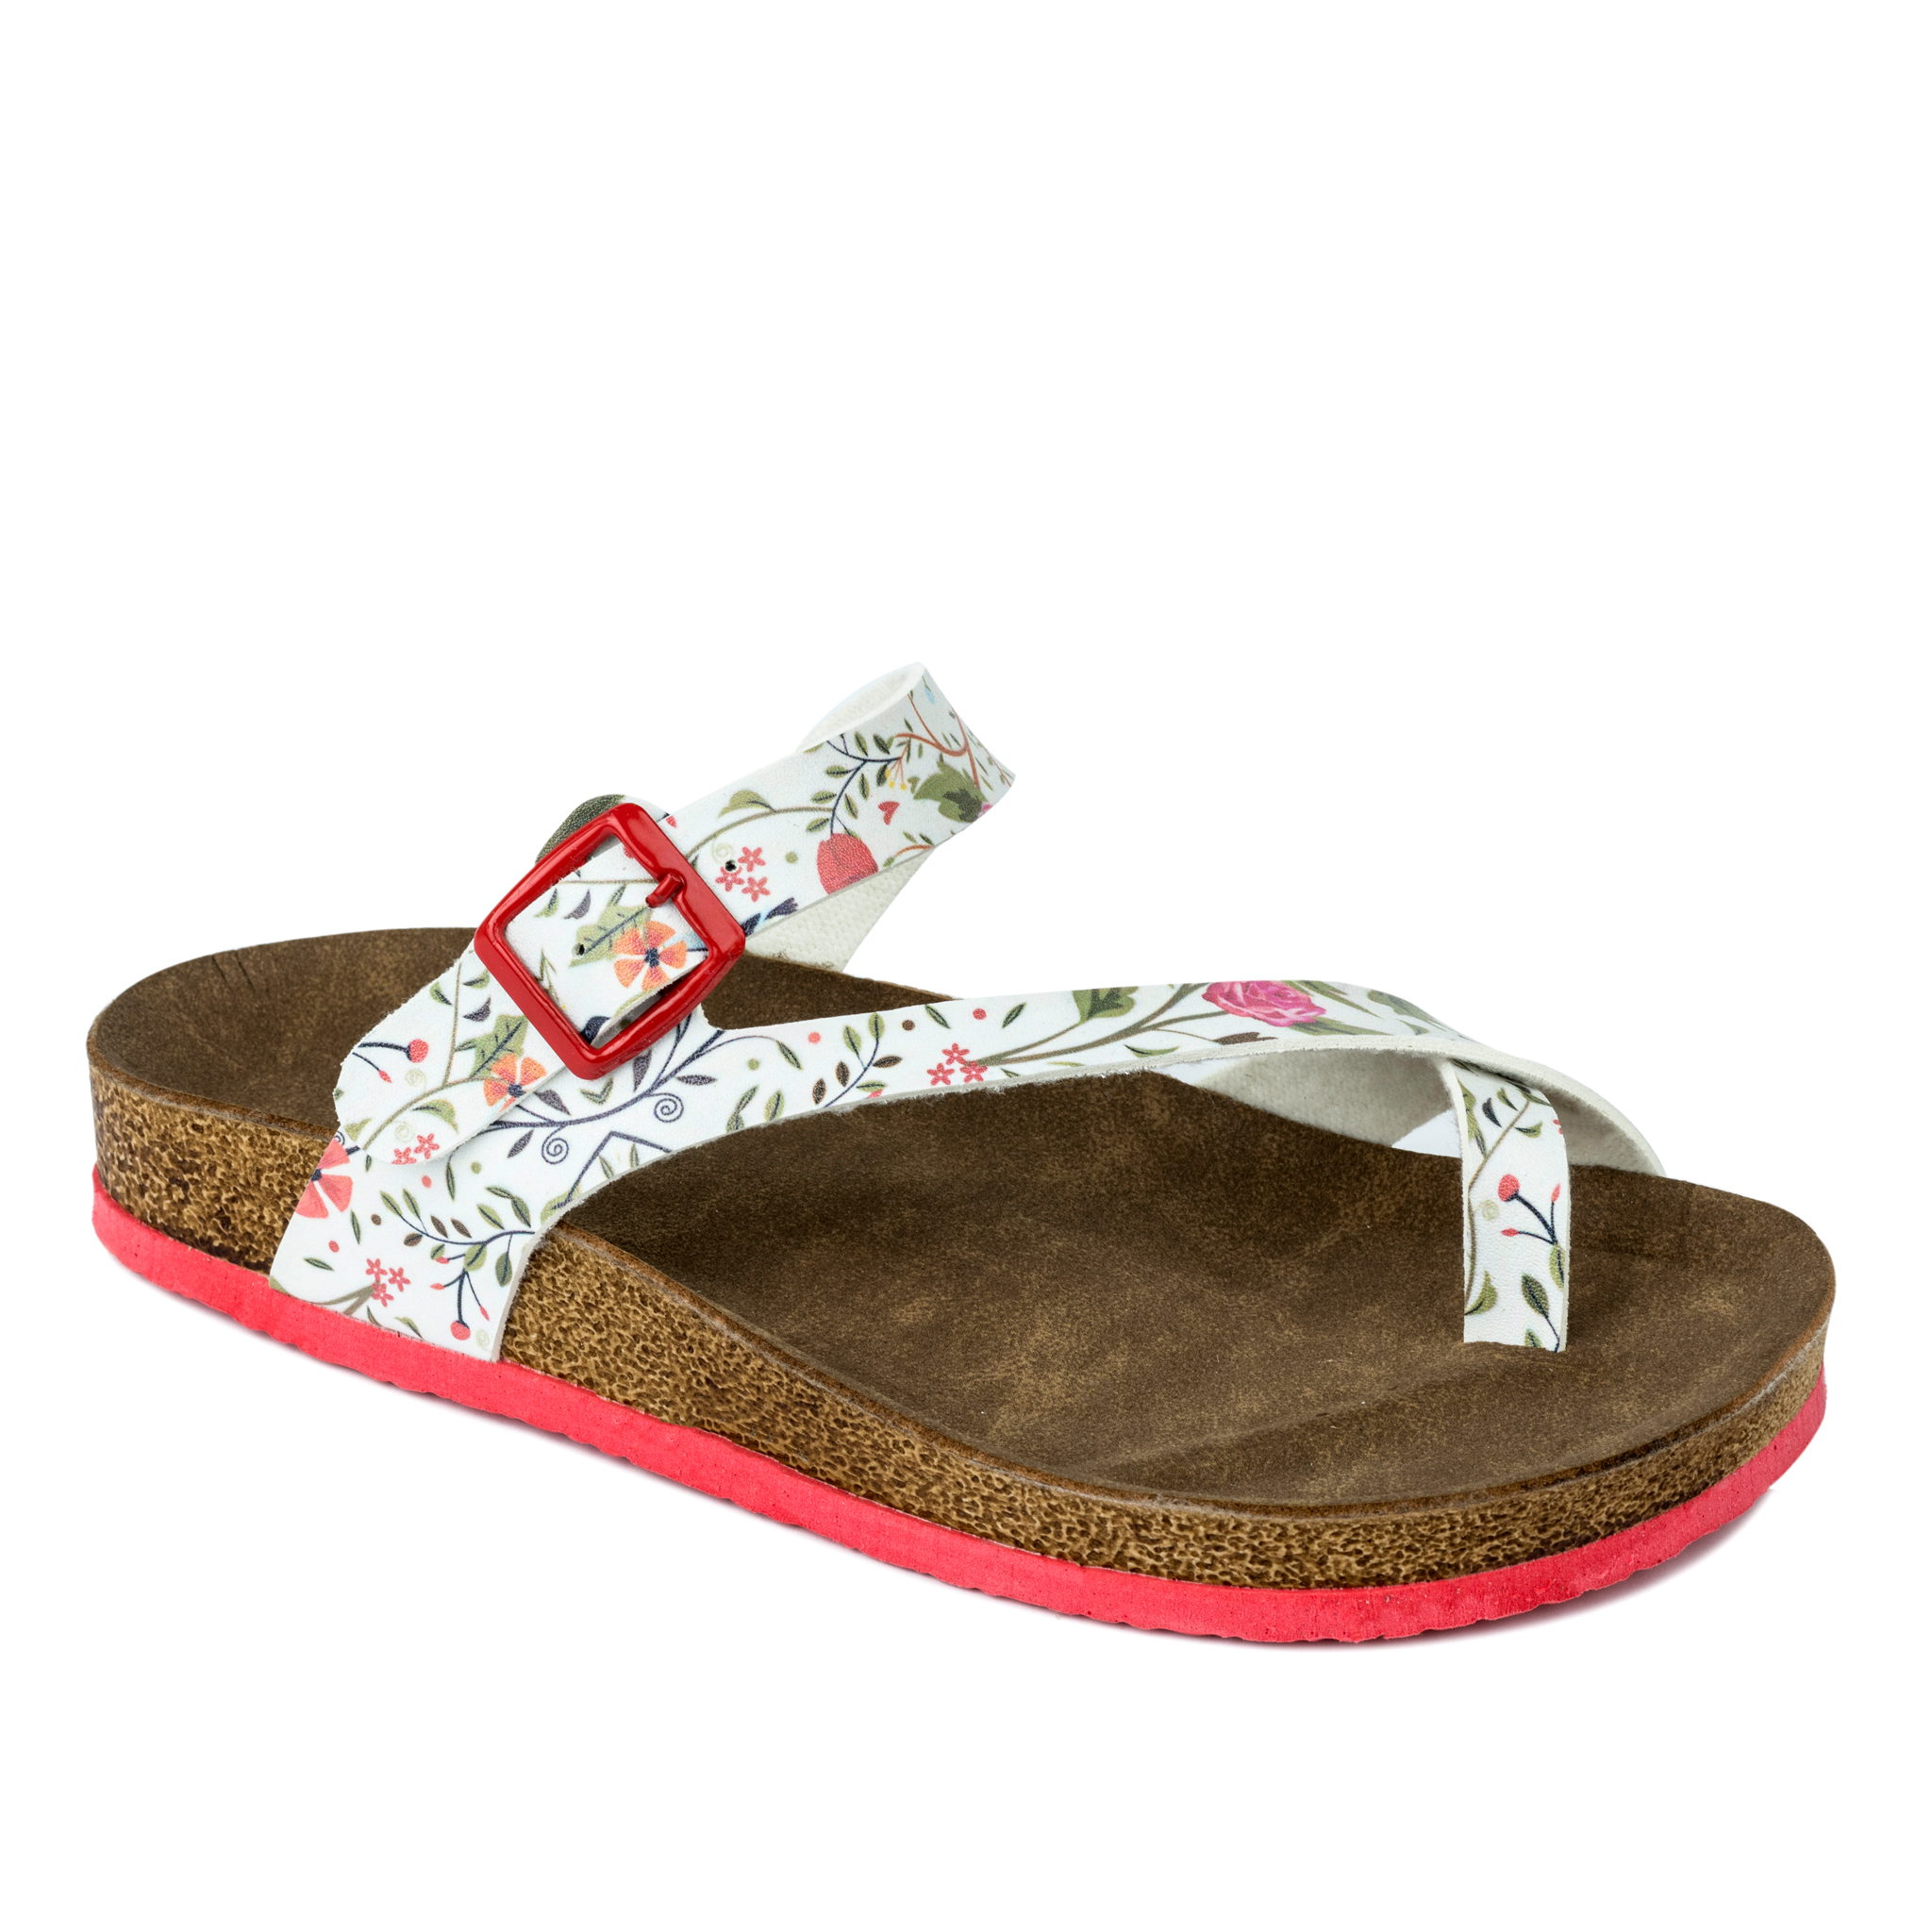 TOE LOOP SLIPPERS WITH FOWER PRINT - WHITE